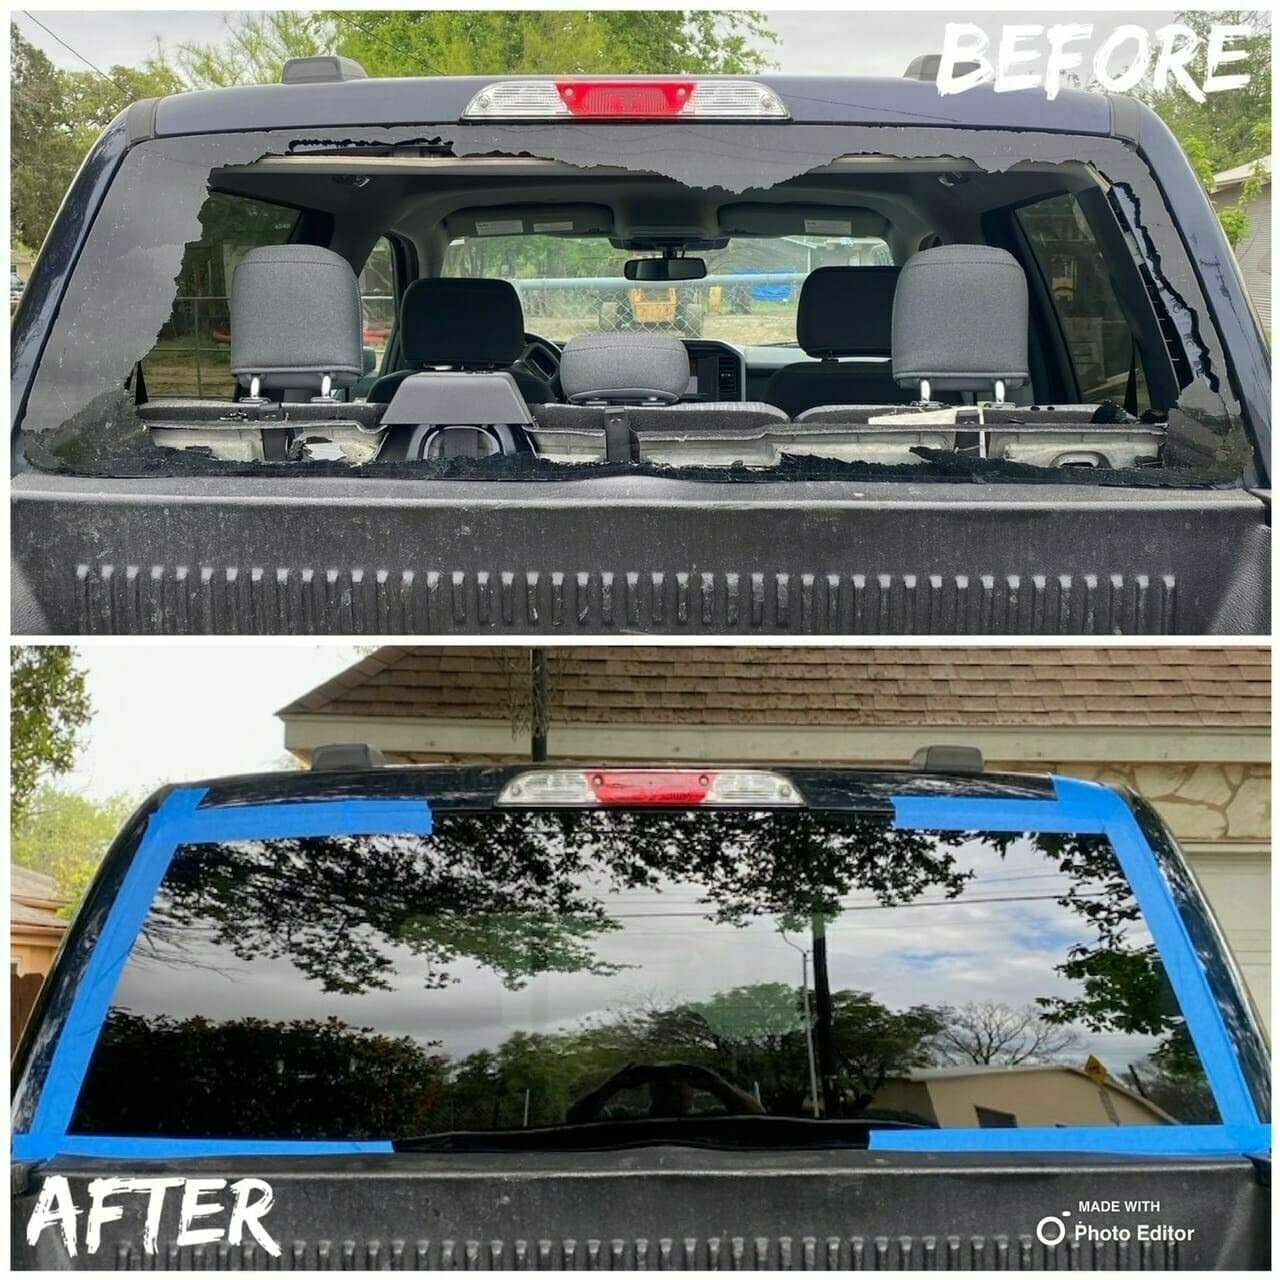 This before and after image highlights the successful repair of a 4-door crew cab pickup truck's rear windshield in Shavano Park, San Antonio, Texas. The top half shows the tinted, stationary back glass with severe damage, as the entire glass is smashed in due to vandalism. The bottom half presents the truck after the repair, fitted with a new, clear, and intact tinted back glass, emphasizing the quality of our windshield replacement service.